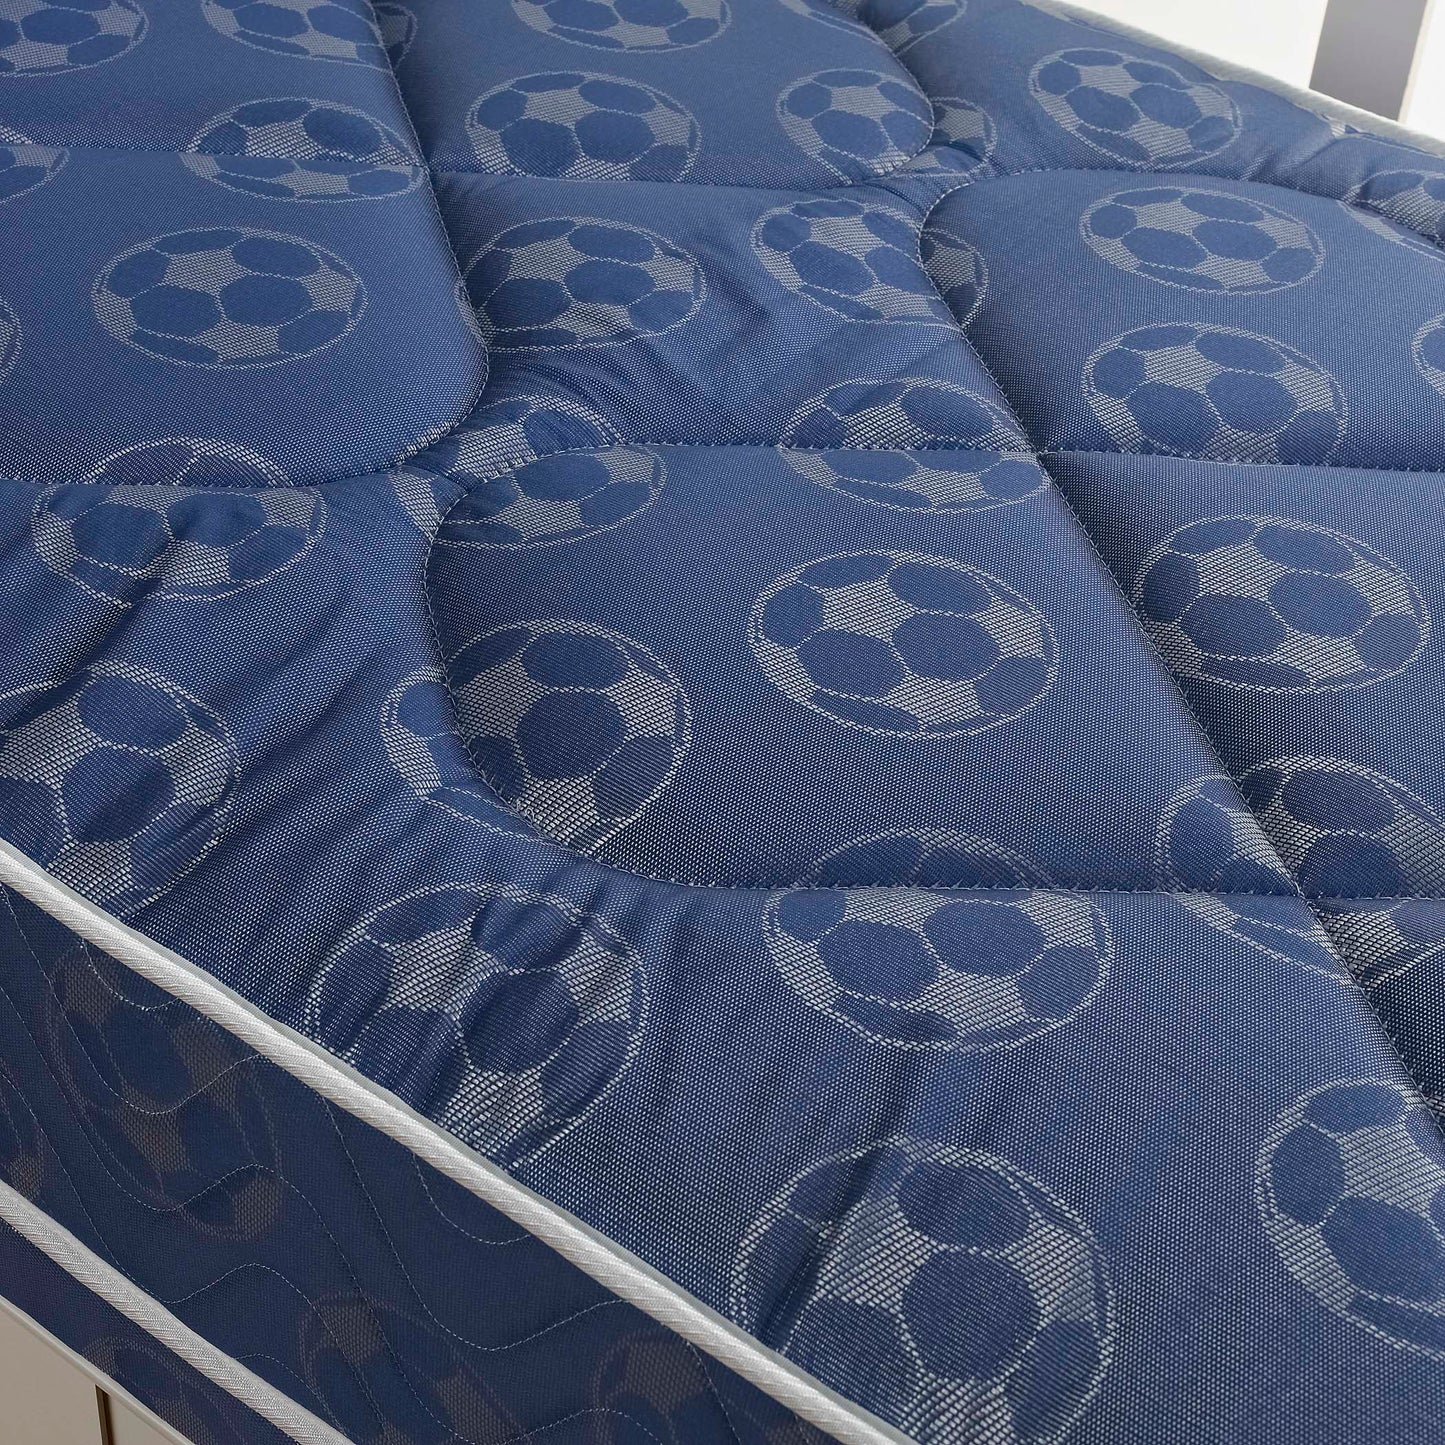 Blue Football Divan Bed With Headboard and Storage